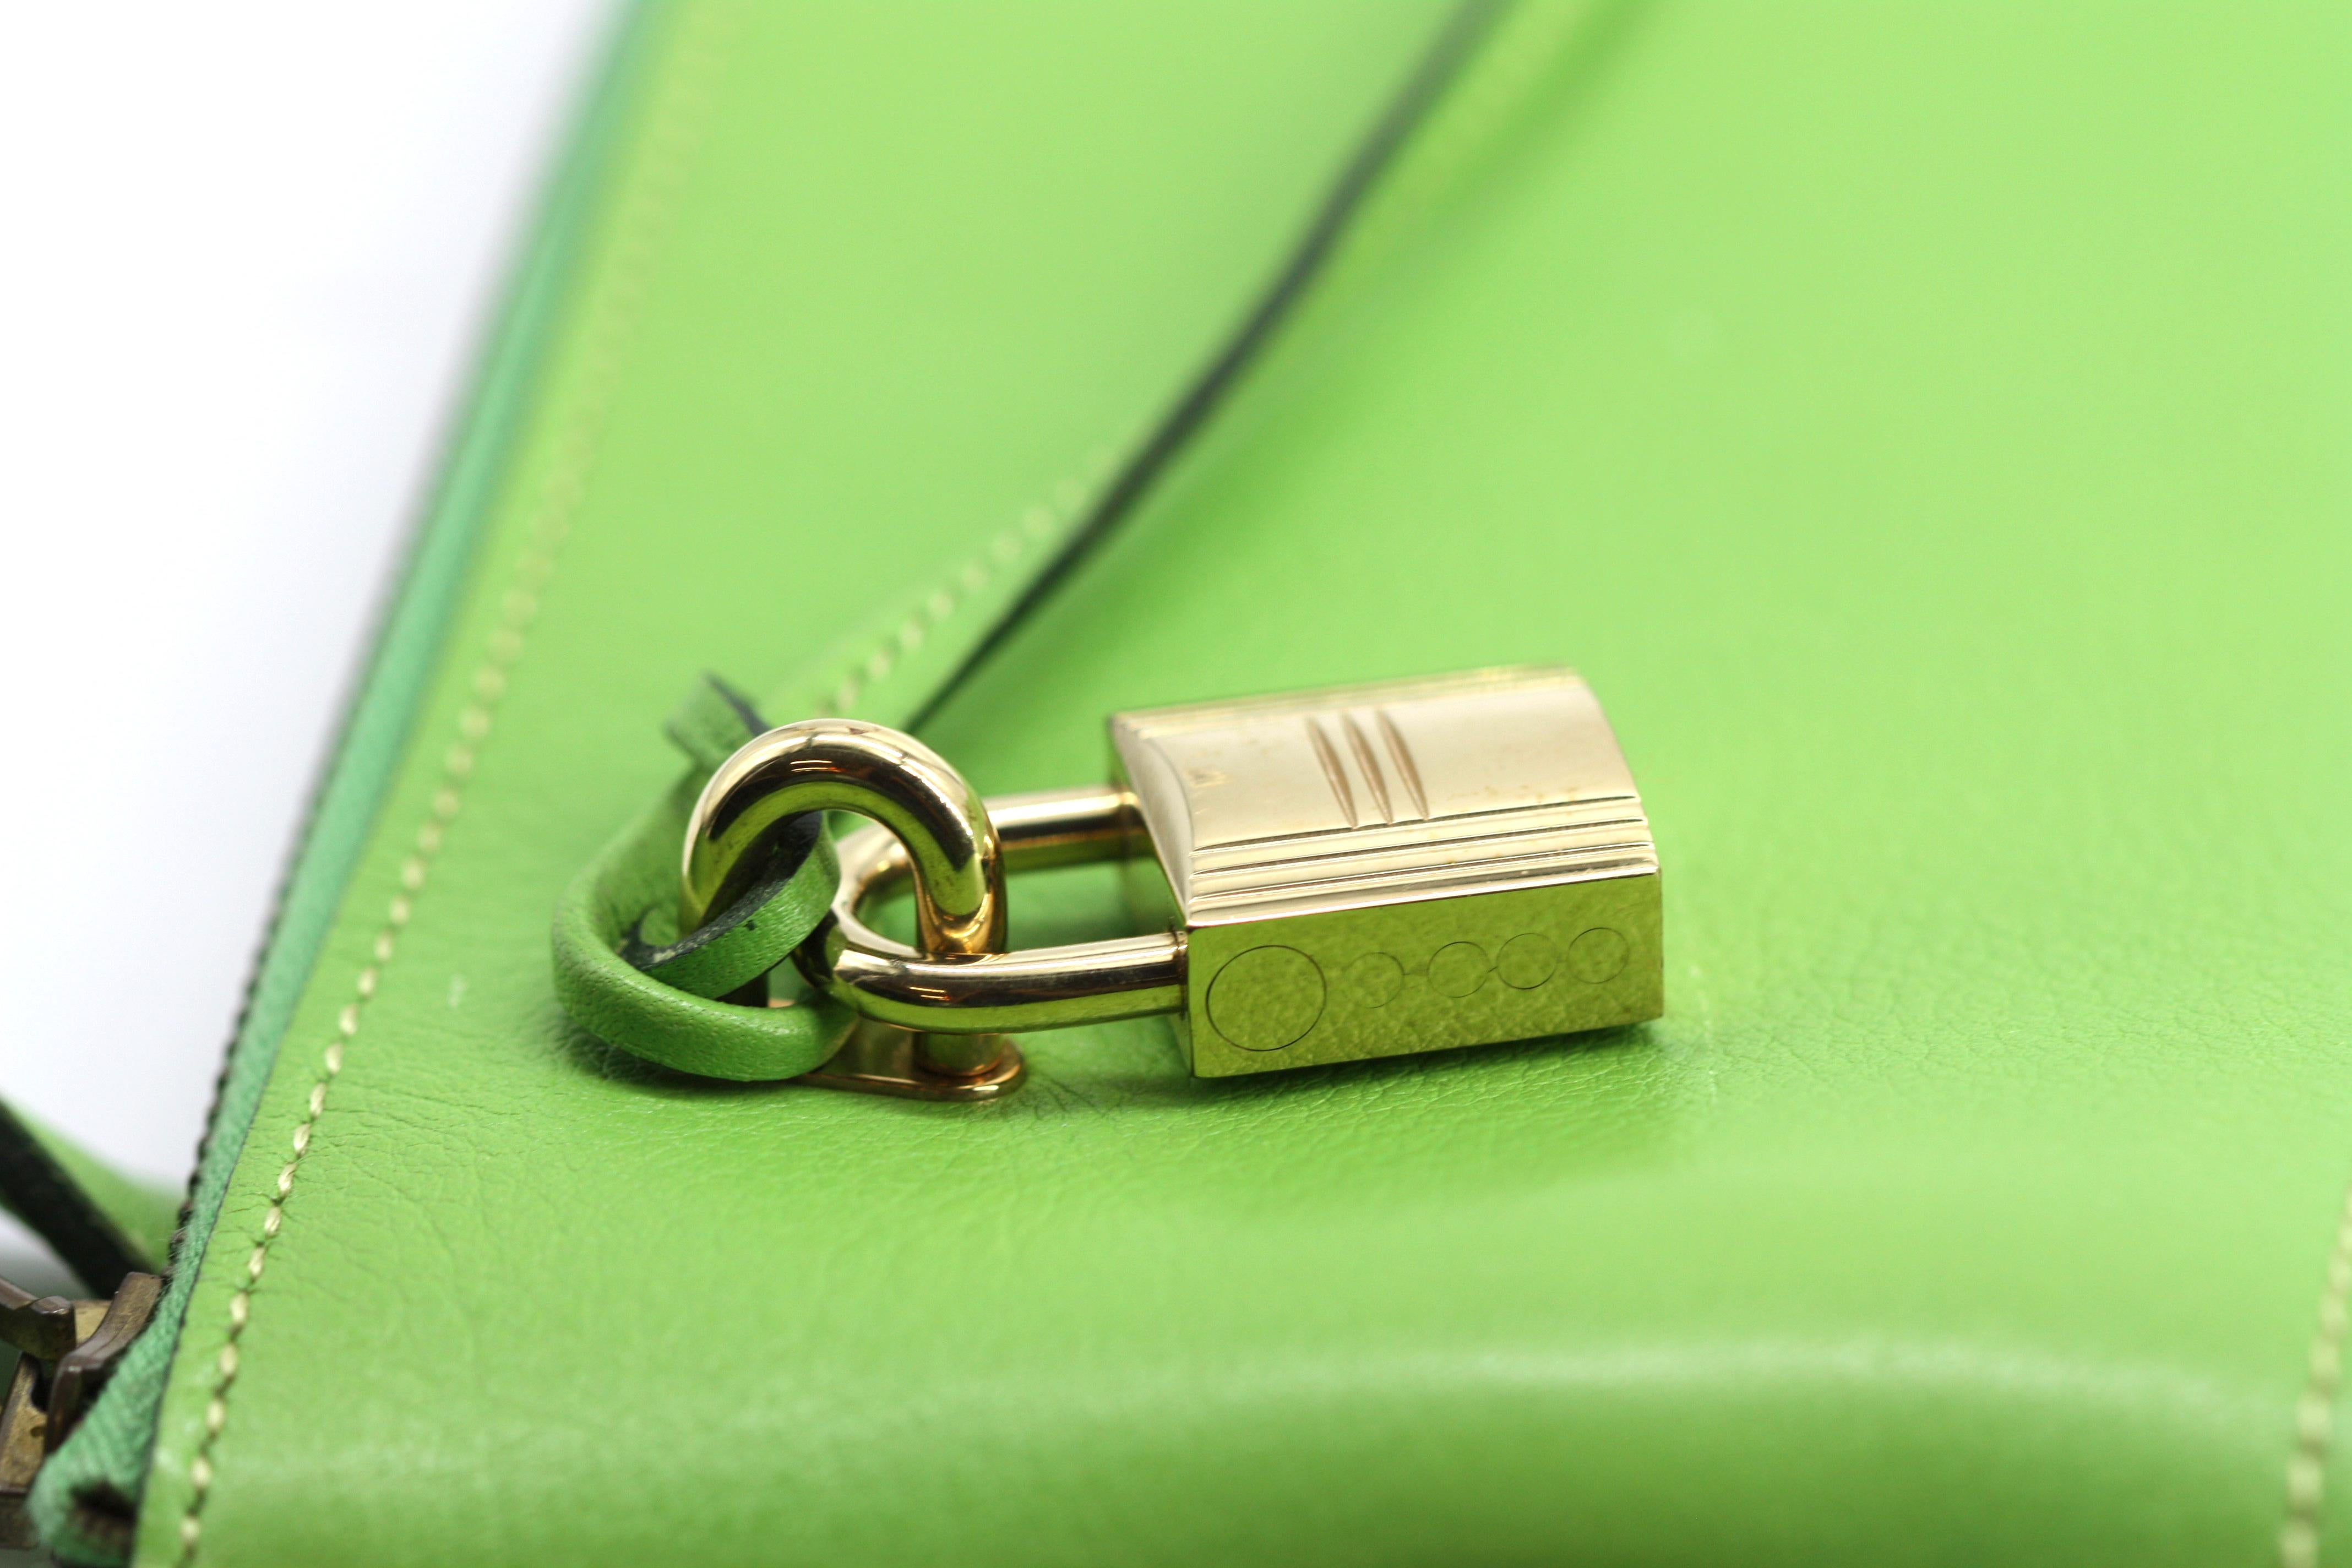 Hermes Kiwi Green Calfs Leather Shoulder Bag In Good Condition For Sale In West Palm Beach, FL